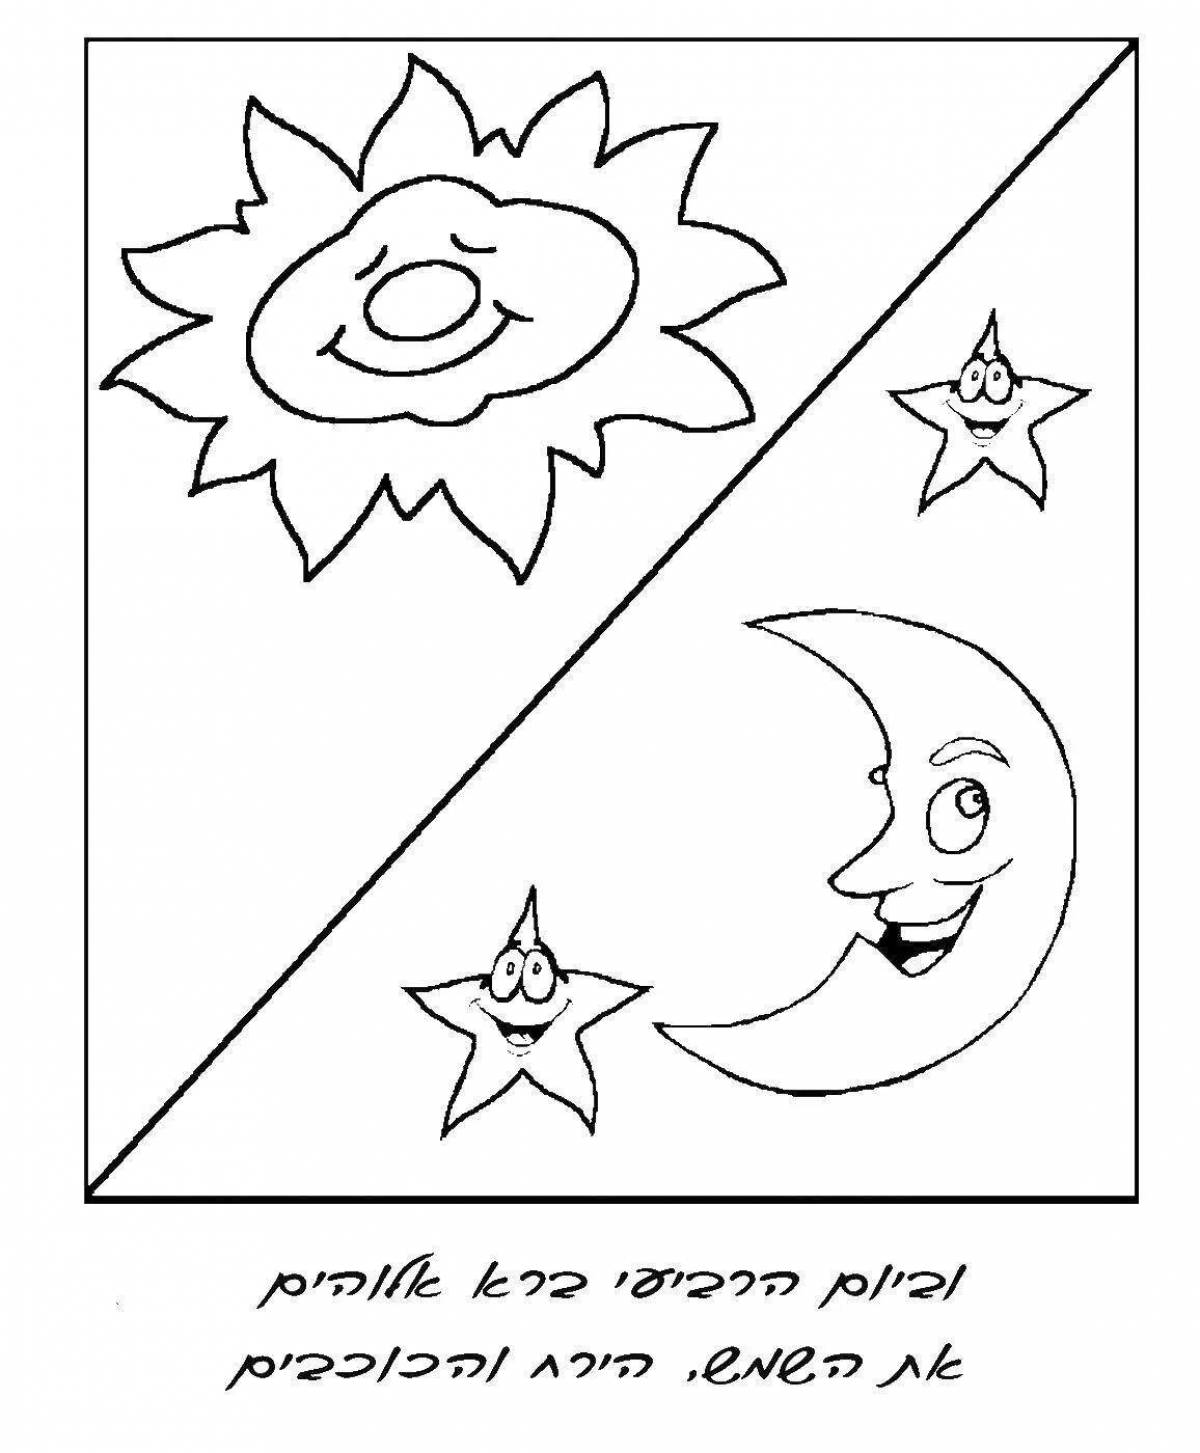 Wonderful coloring of the moon and the sun for children